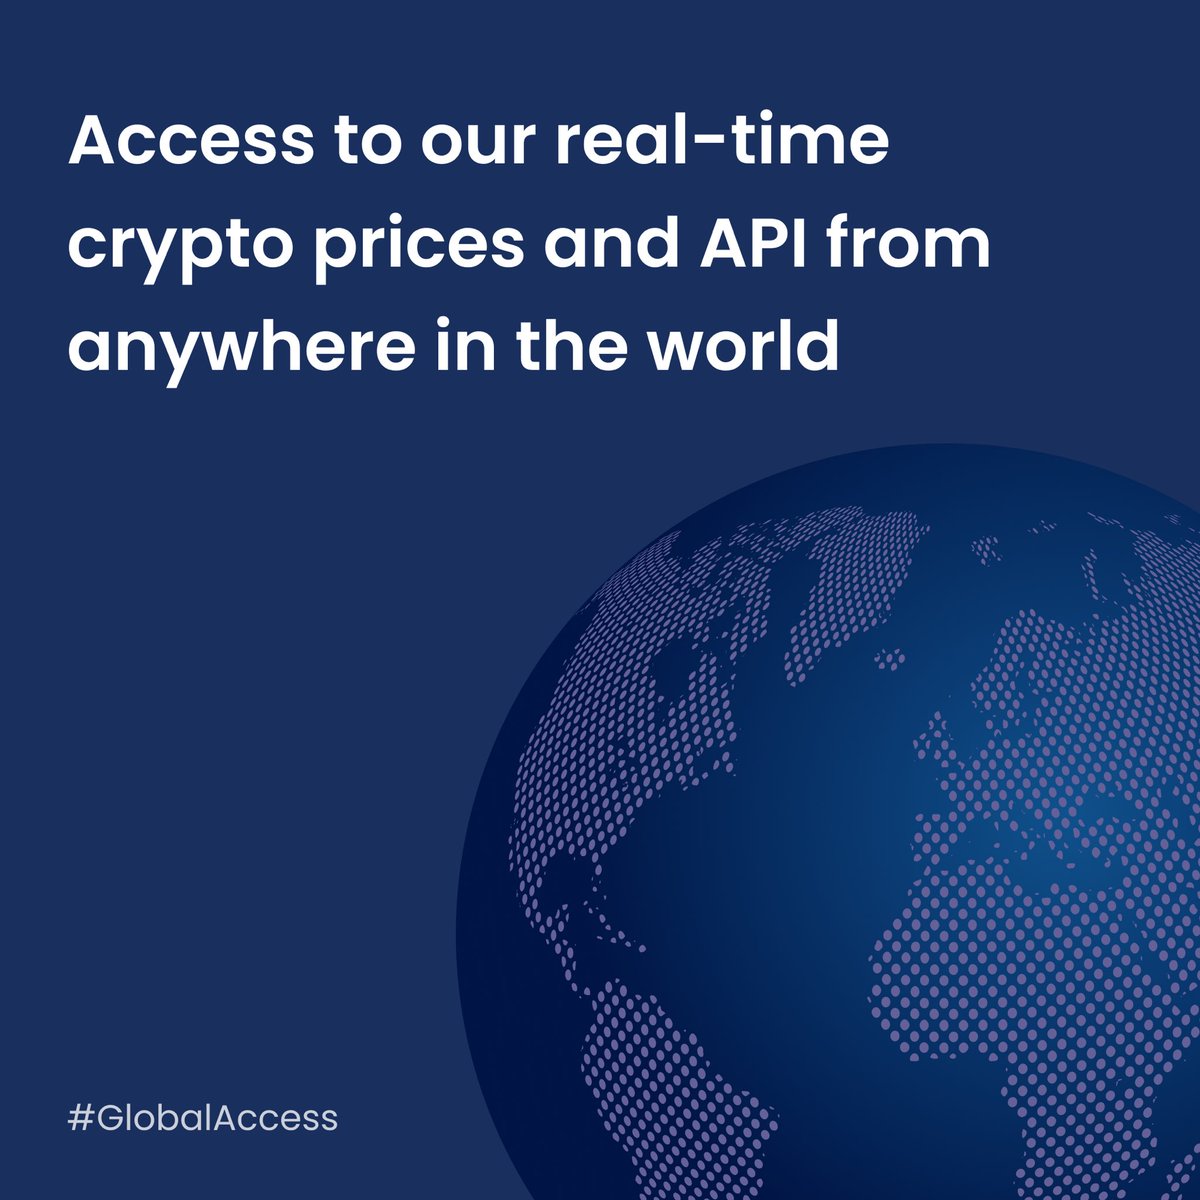 🌍 Good news for crypto enthusiasts around the globe! 🌐

We don't have any territorial boundaries—you can access our real-time #crypto prices and API from anywhere in the world! 🌏

Dive in now 👉 coinpricelist.io

#Cryptocurrency #GlobalAccess #Bitcoin #Ethereum